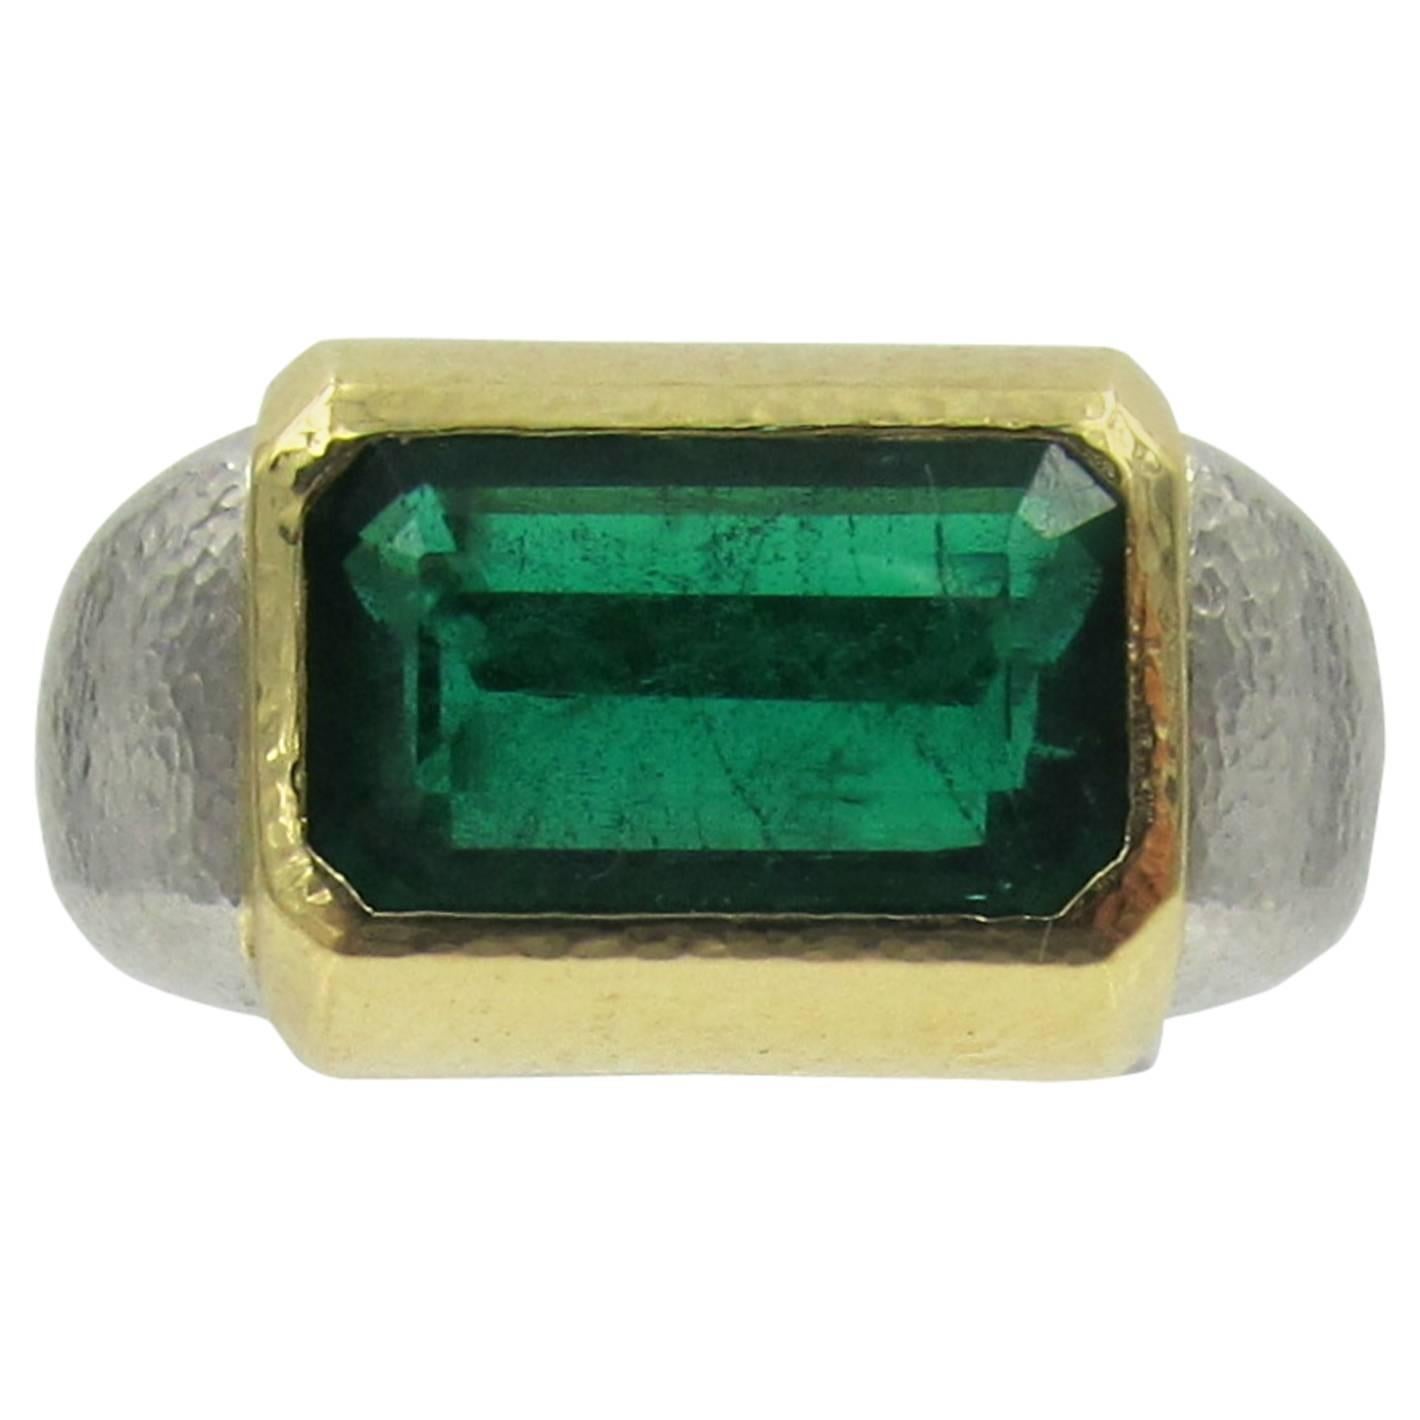 Vibrant green color 5.41 carat emerald embedded in 18k yellow gold with a platinum hammered finish band.
Ring size is 6( resizable)
Signed: David Webb
